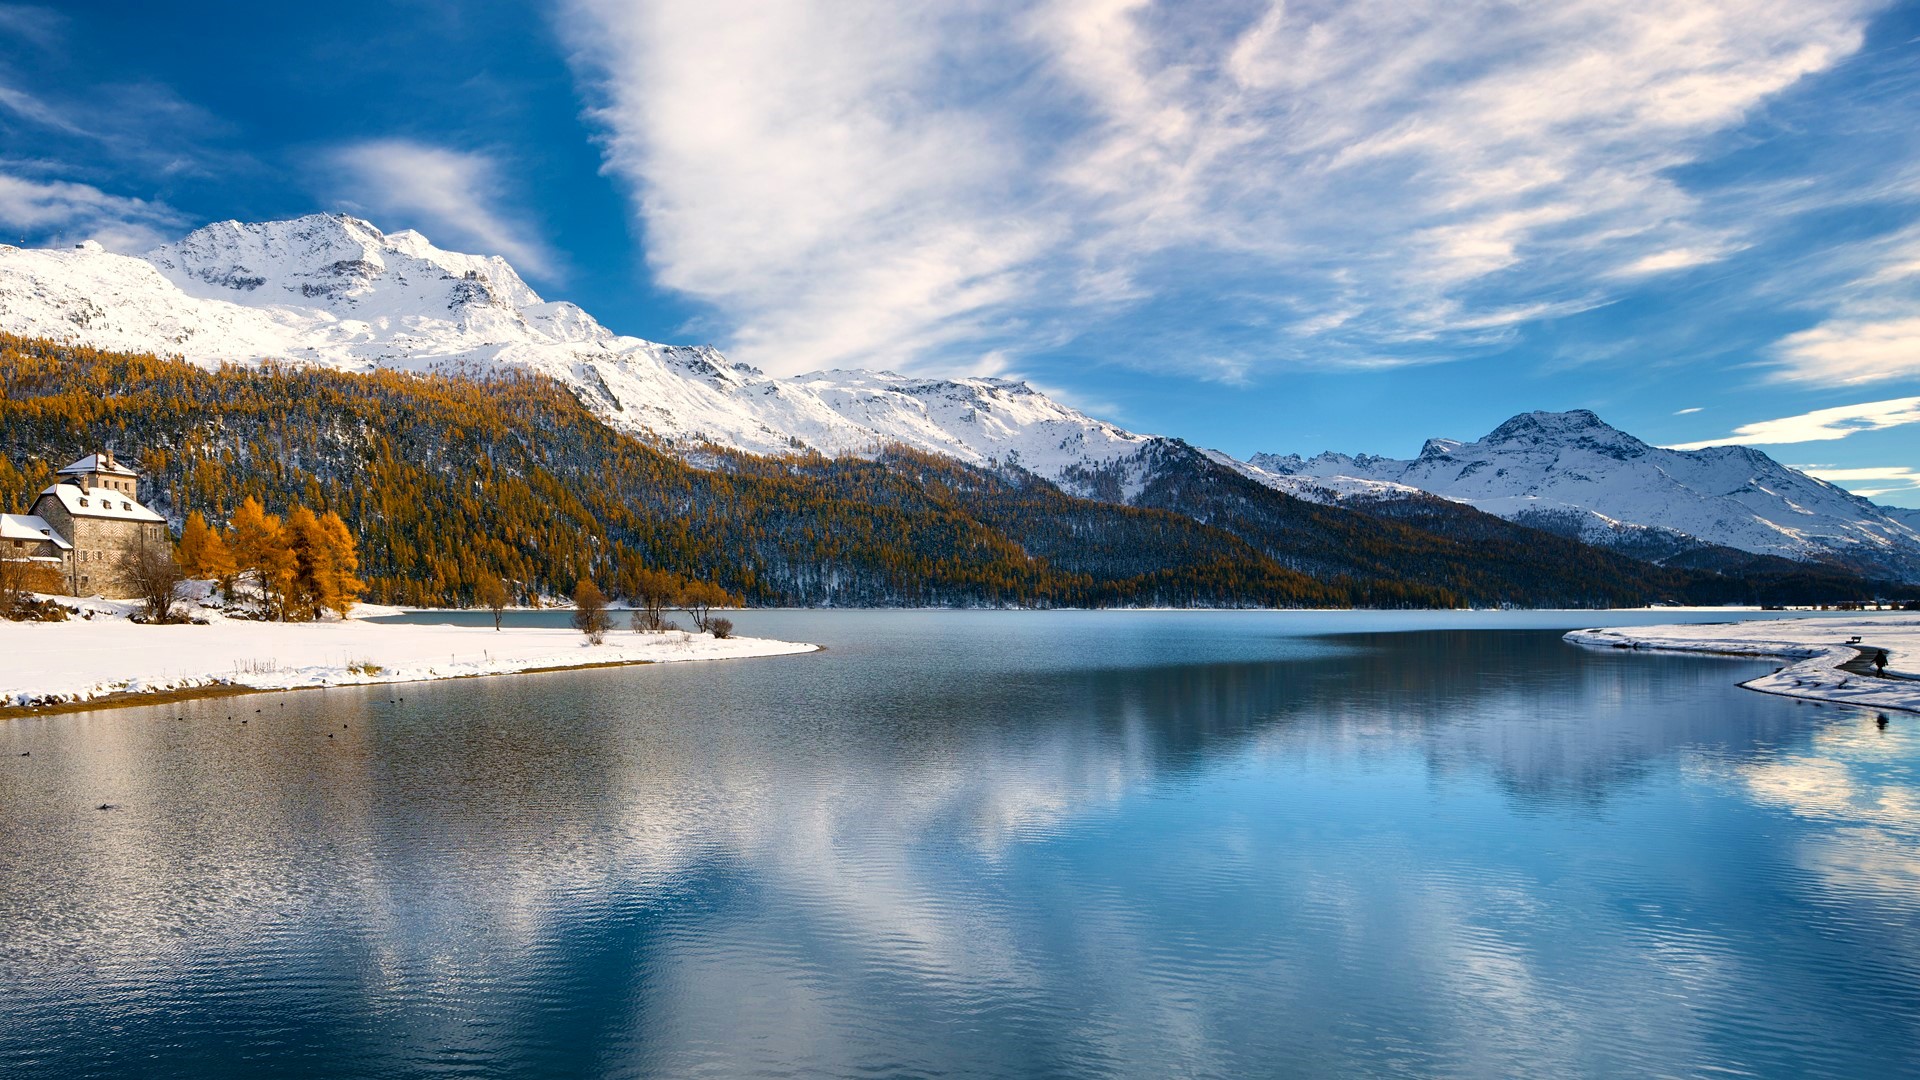 General 1920x1080 nature landscape trees river mountains clouds sky water snow Switzerland snowy peak Alps